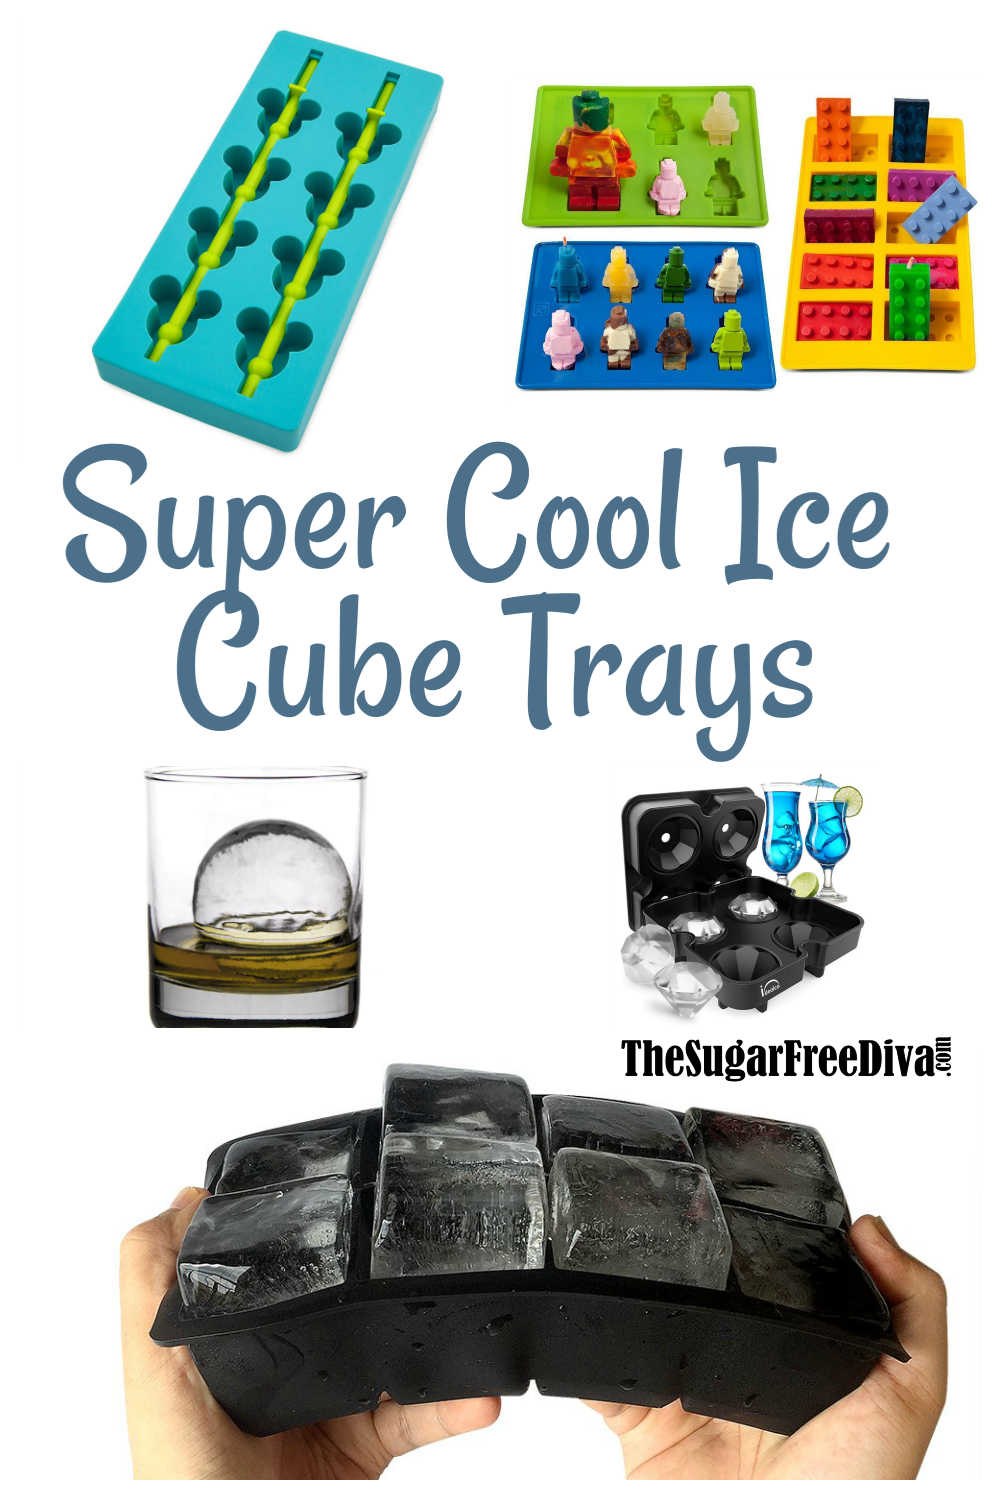 Super Cool Ice Cube Trays